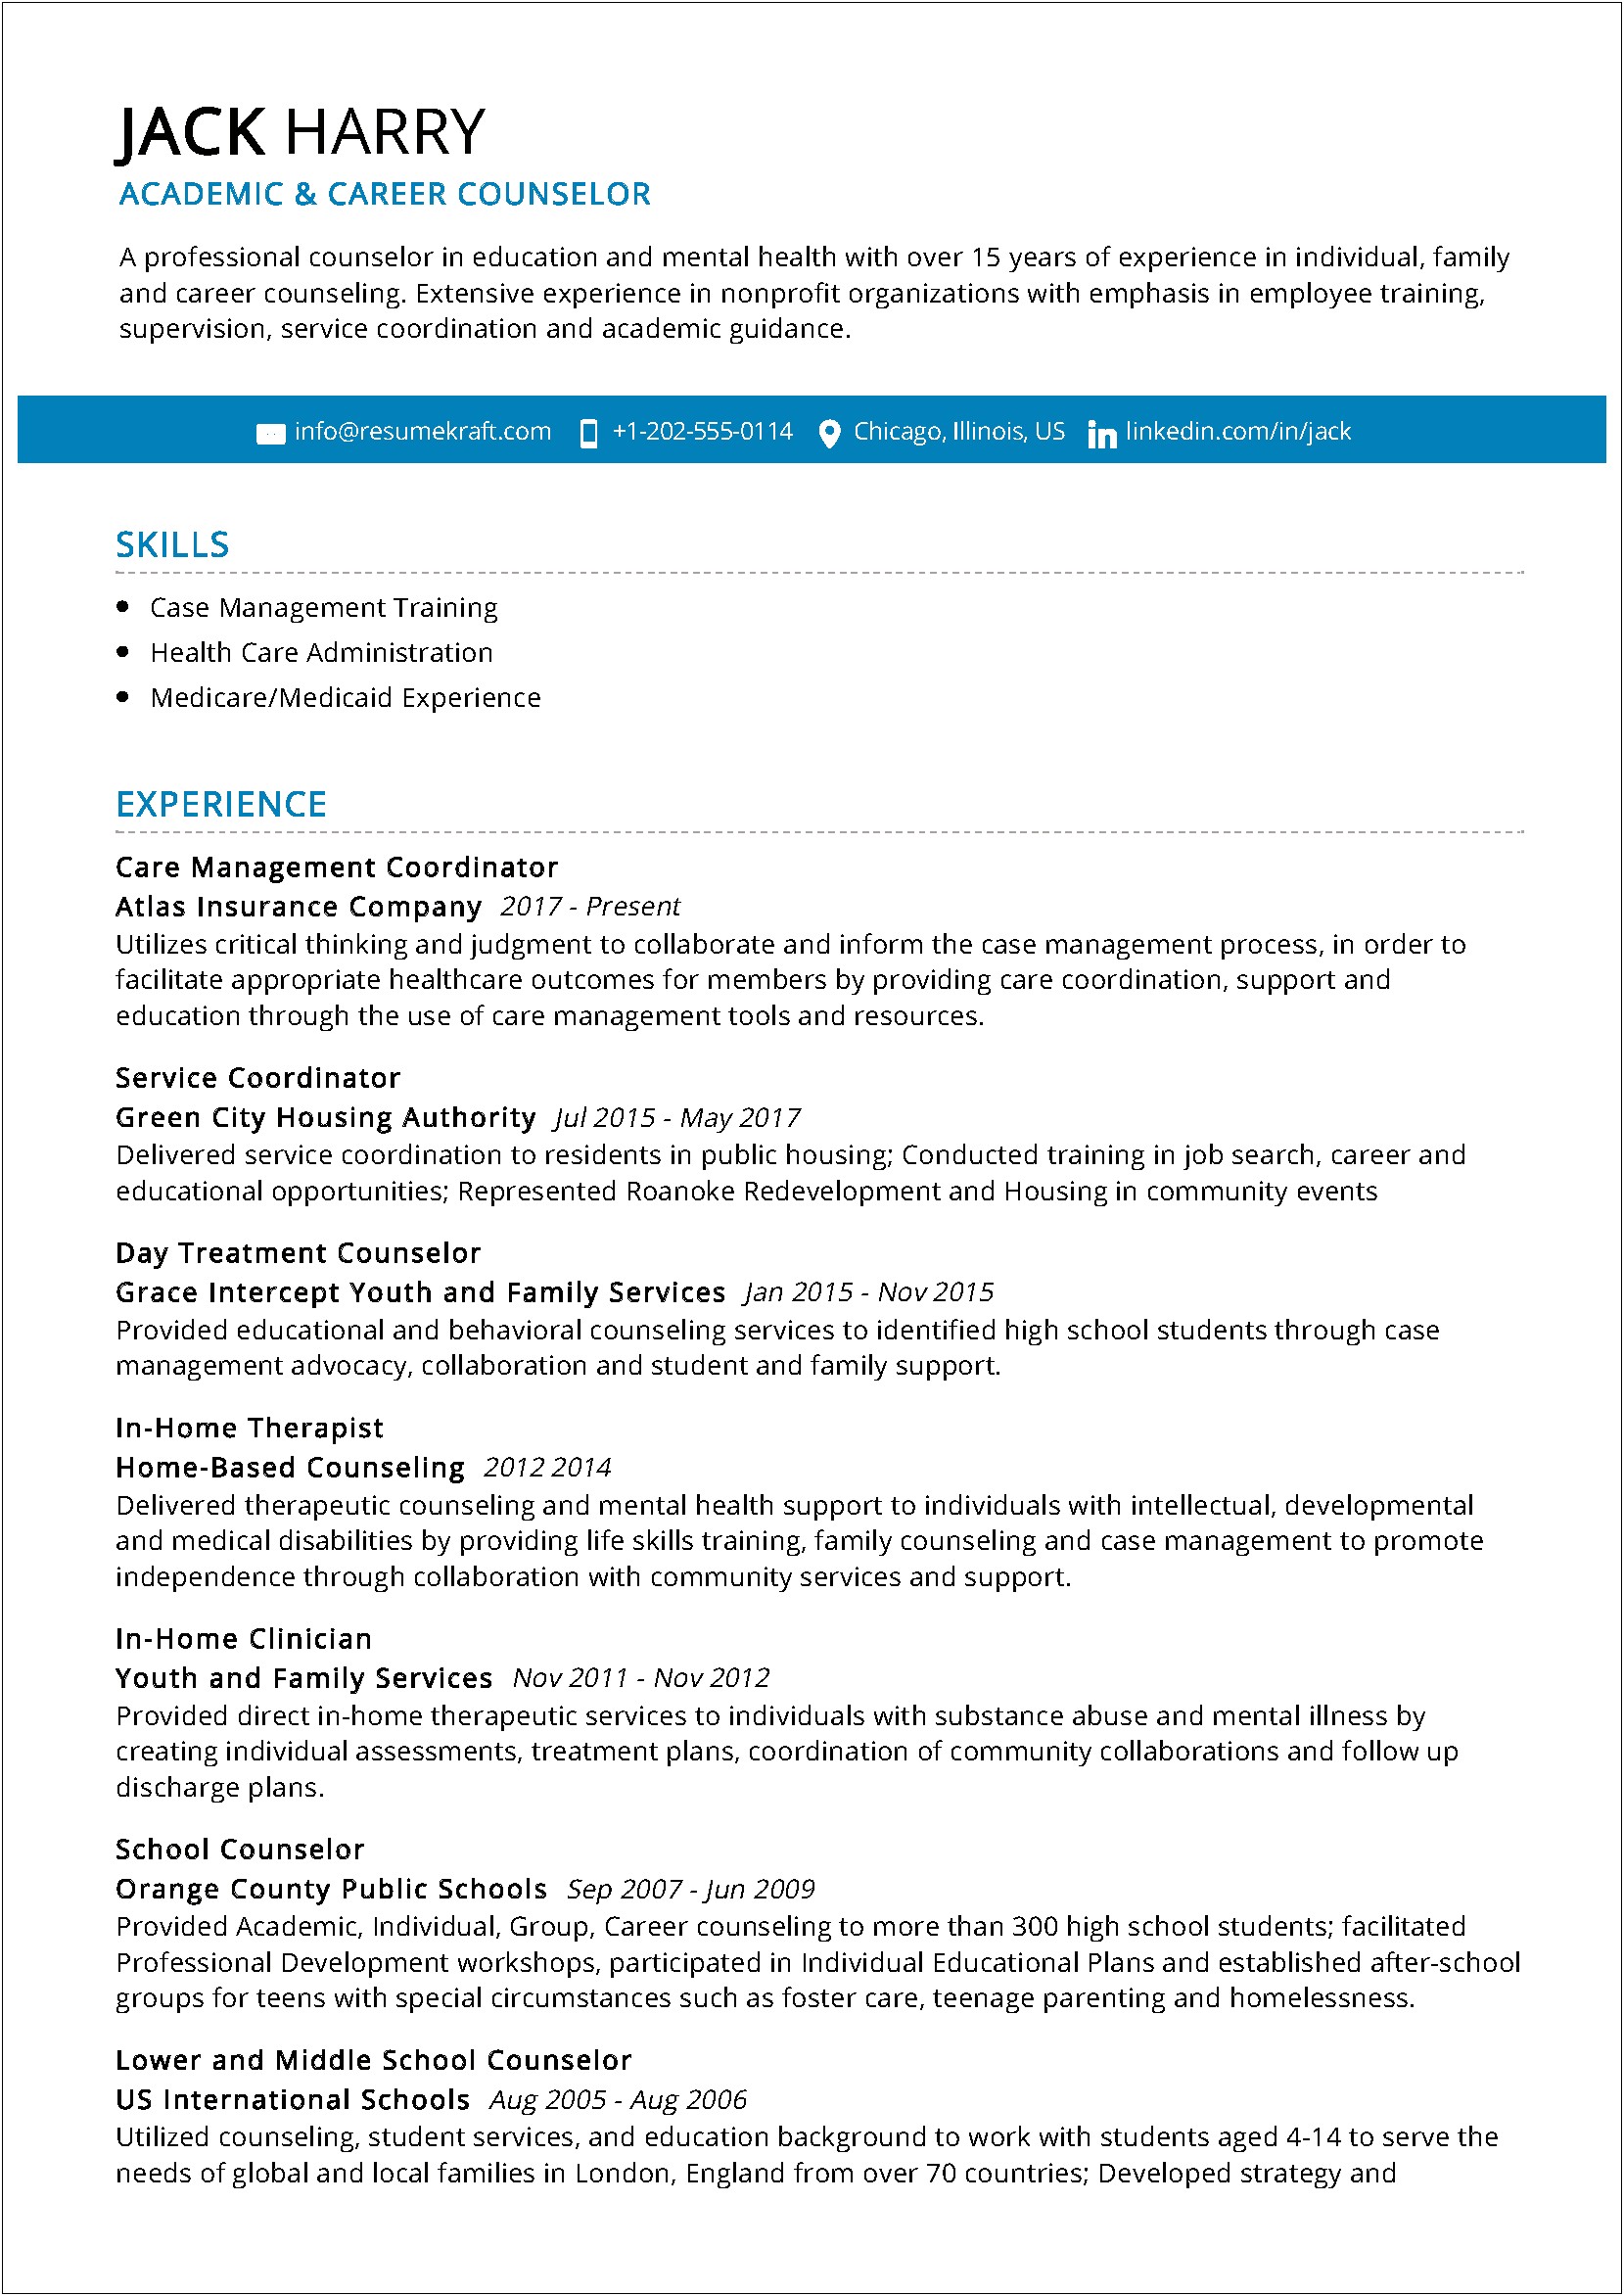 Entry Level Substance Abuse Counselor Resume Sample